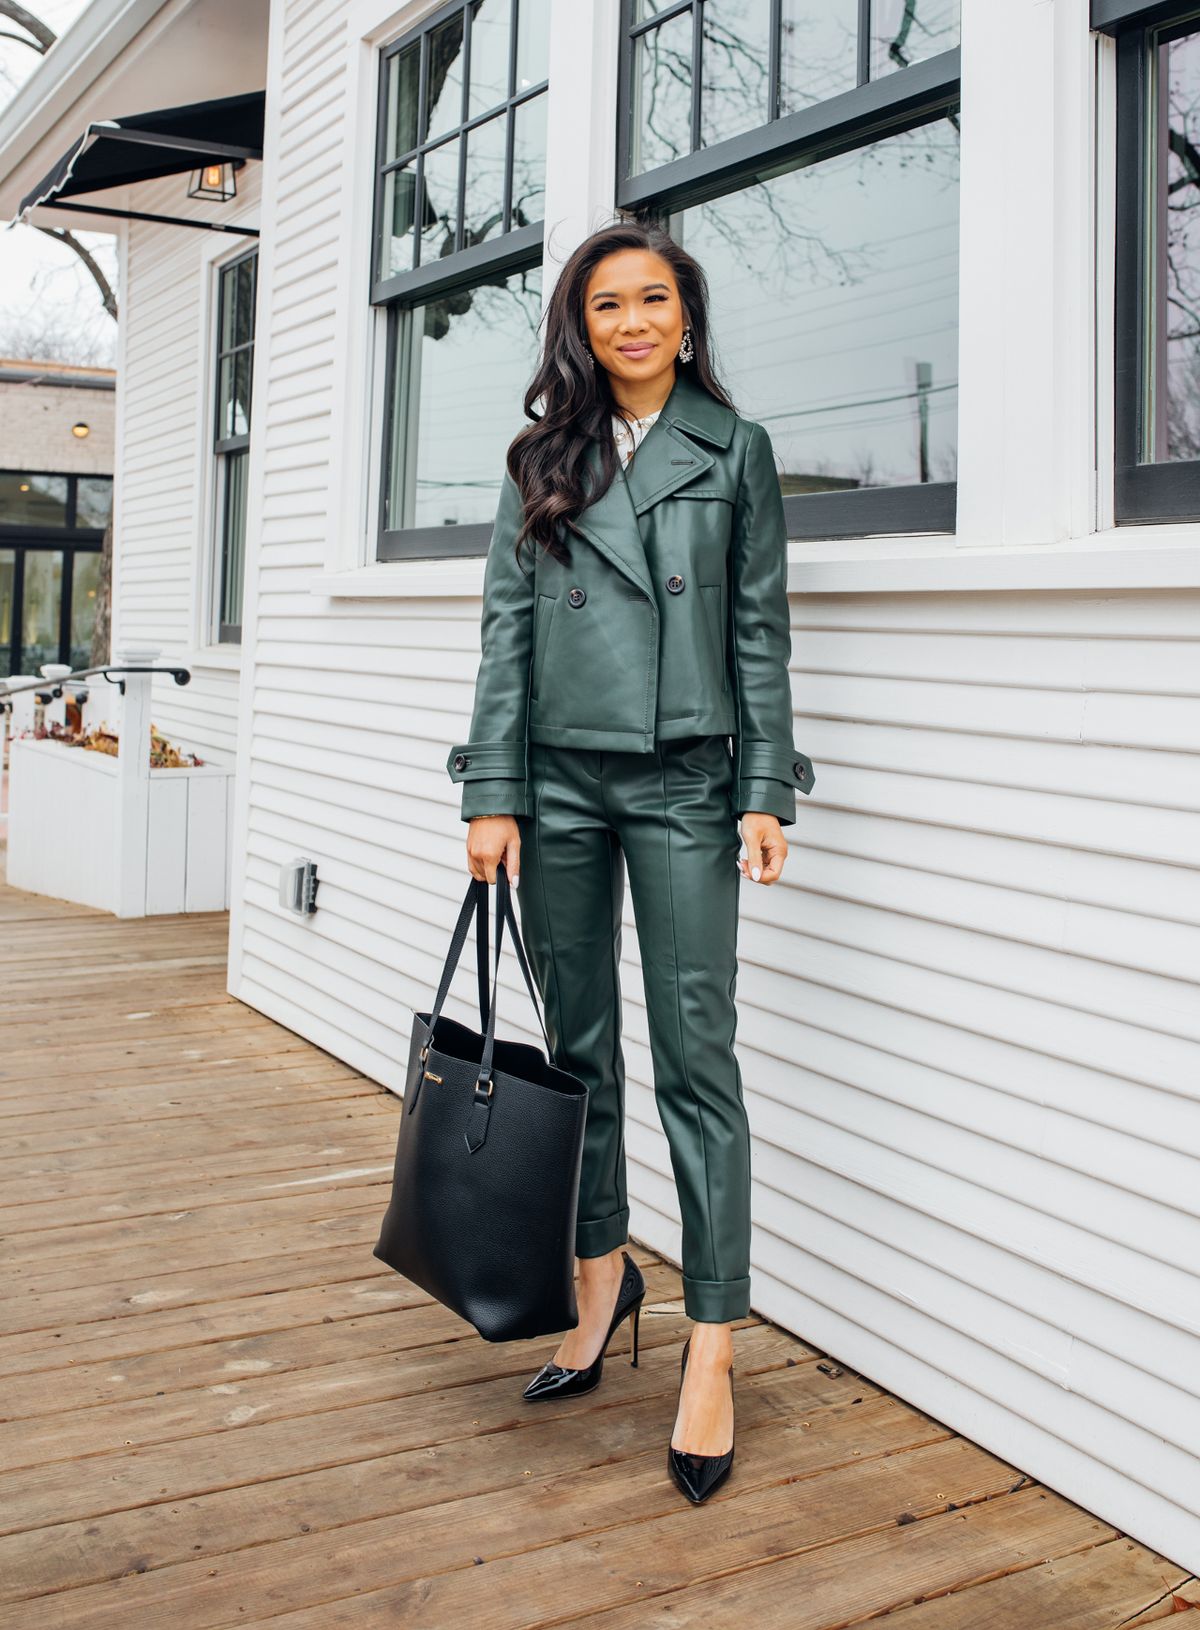 The Complete Fierce Fashion Guide to Wearing Faux Leather